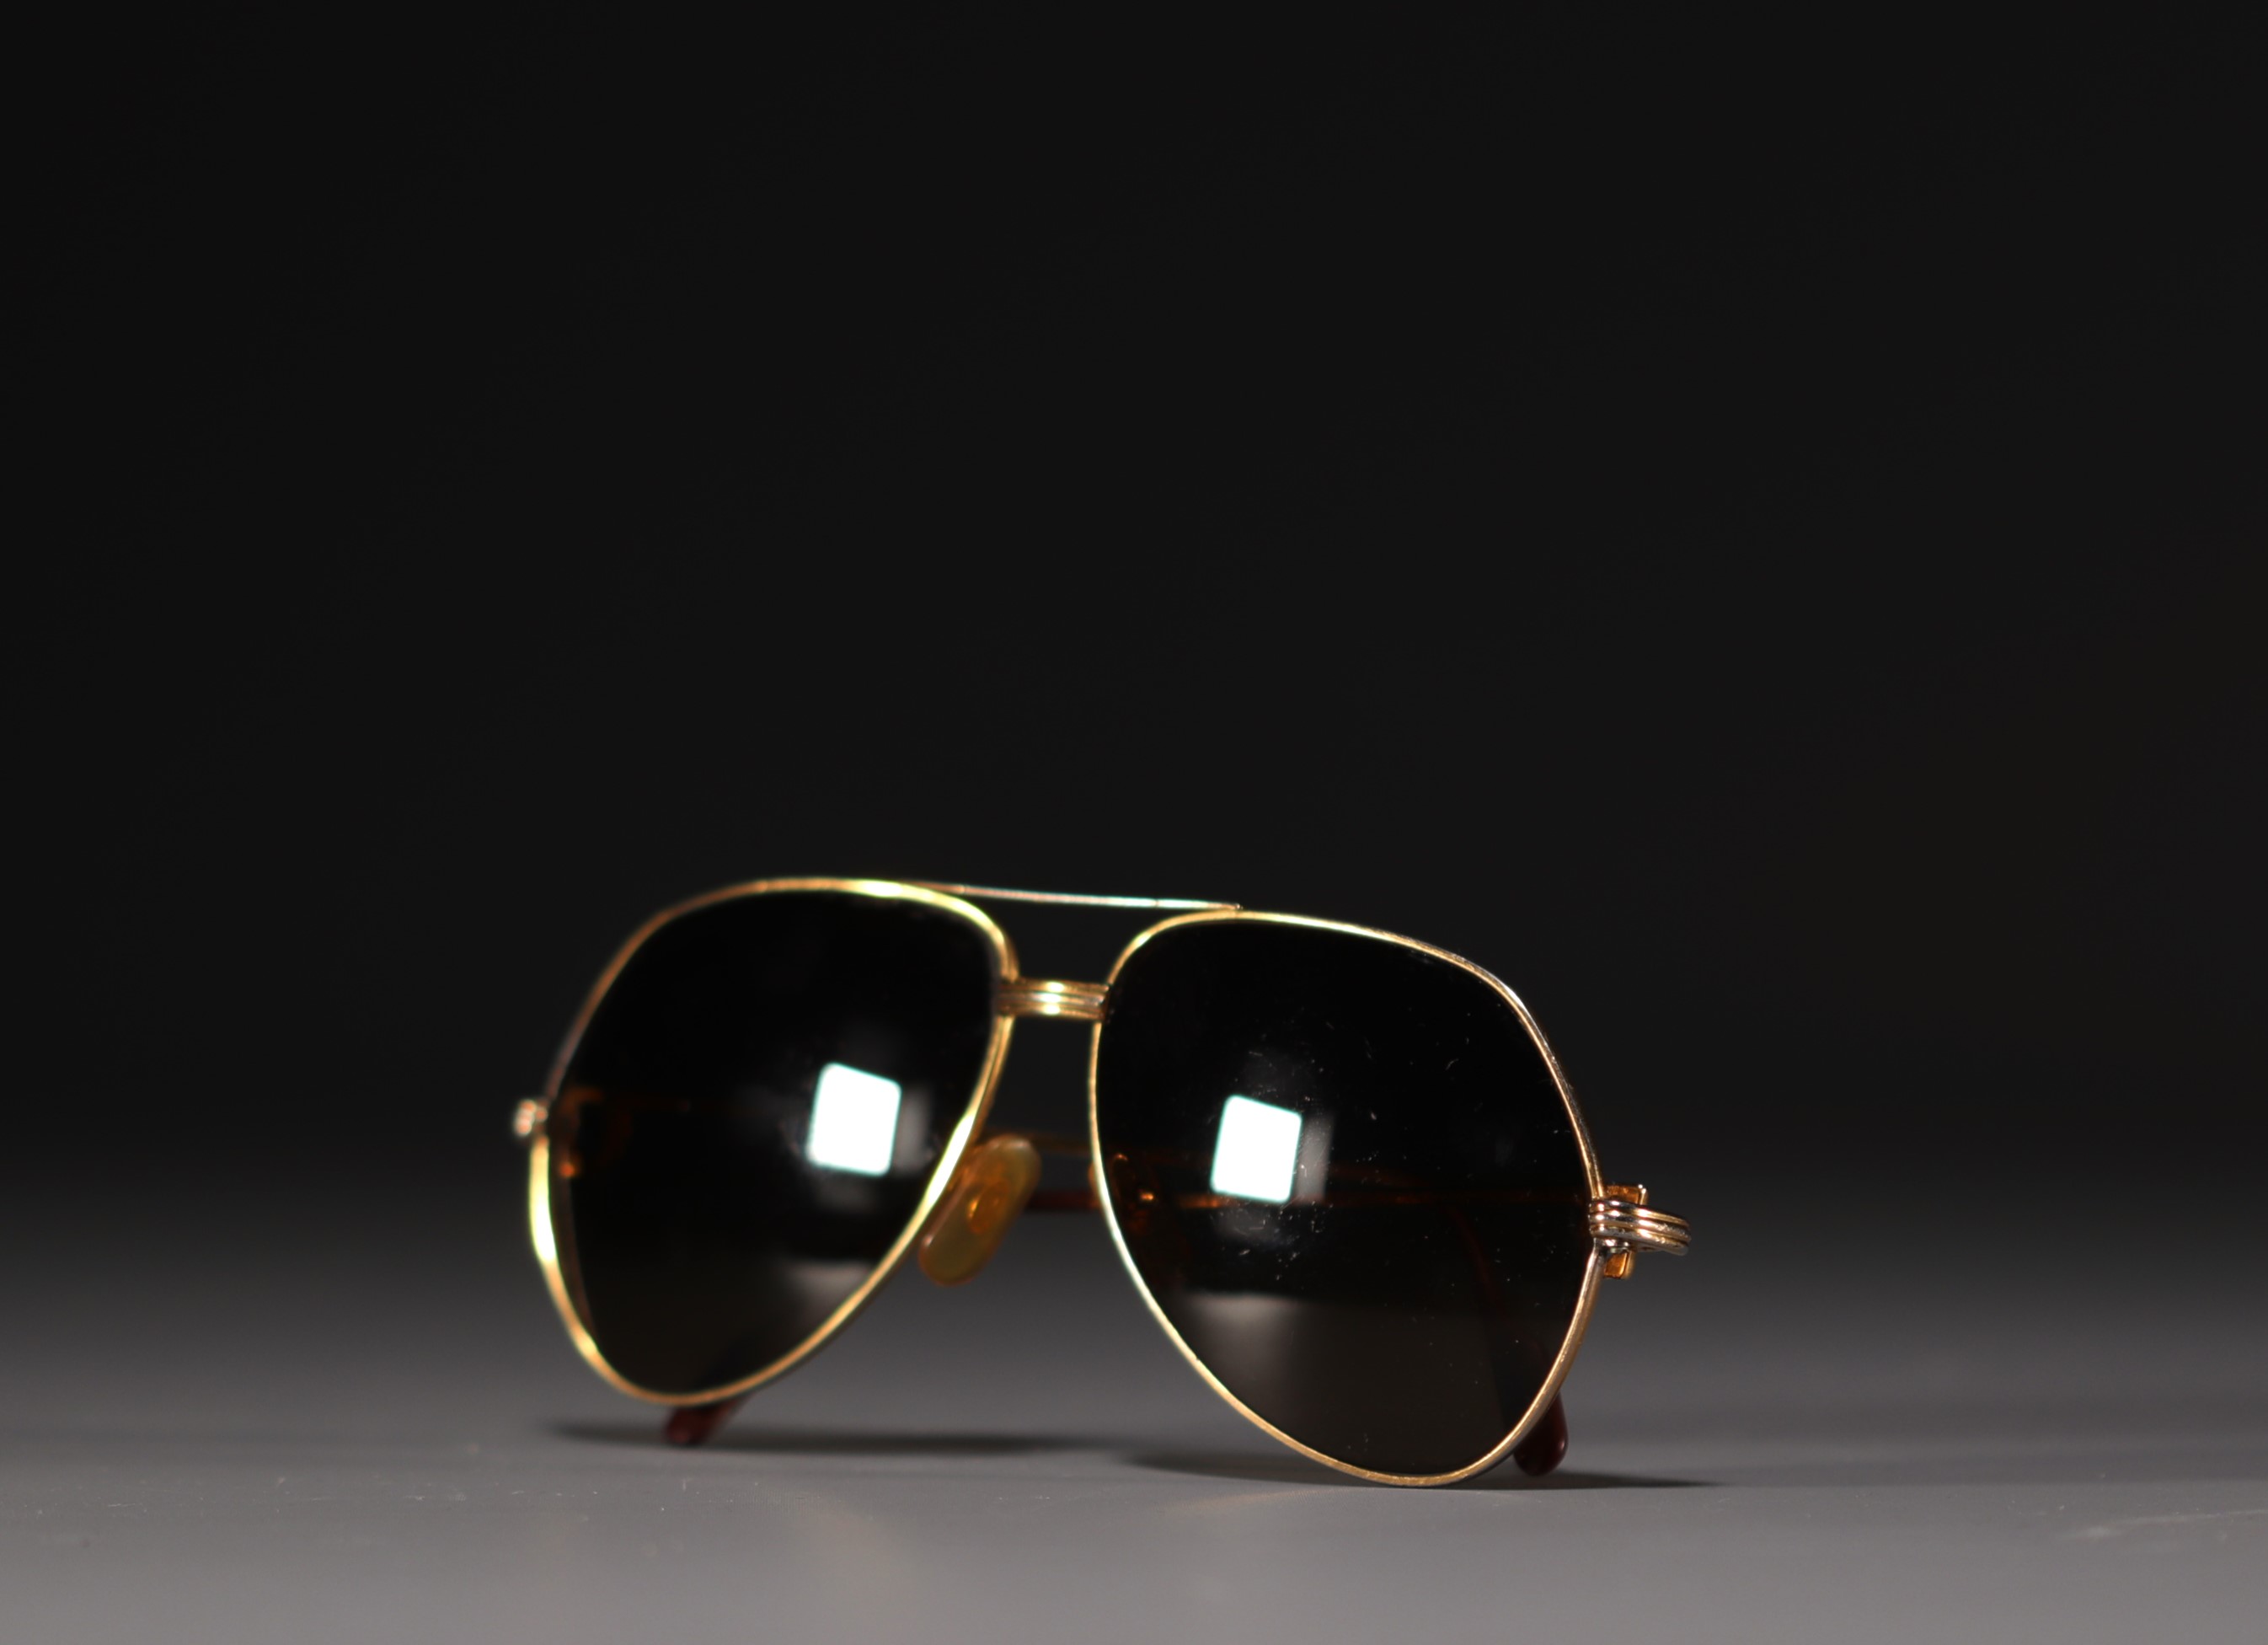 Cartier - "Must" Pair of vintage sunglasses. - Image 3 of 5